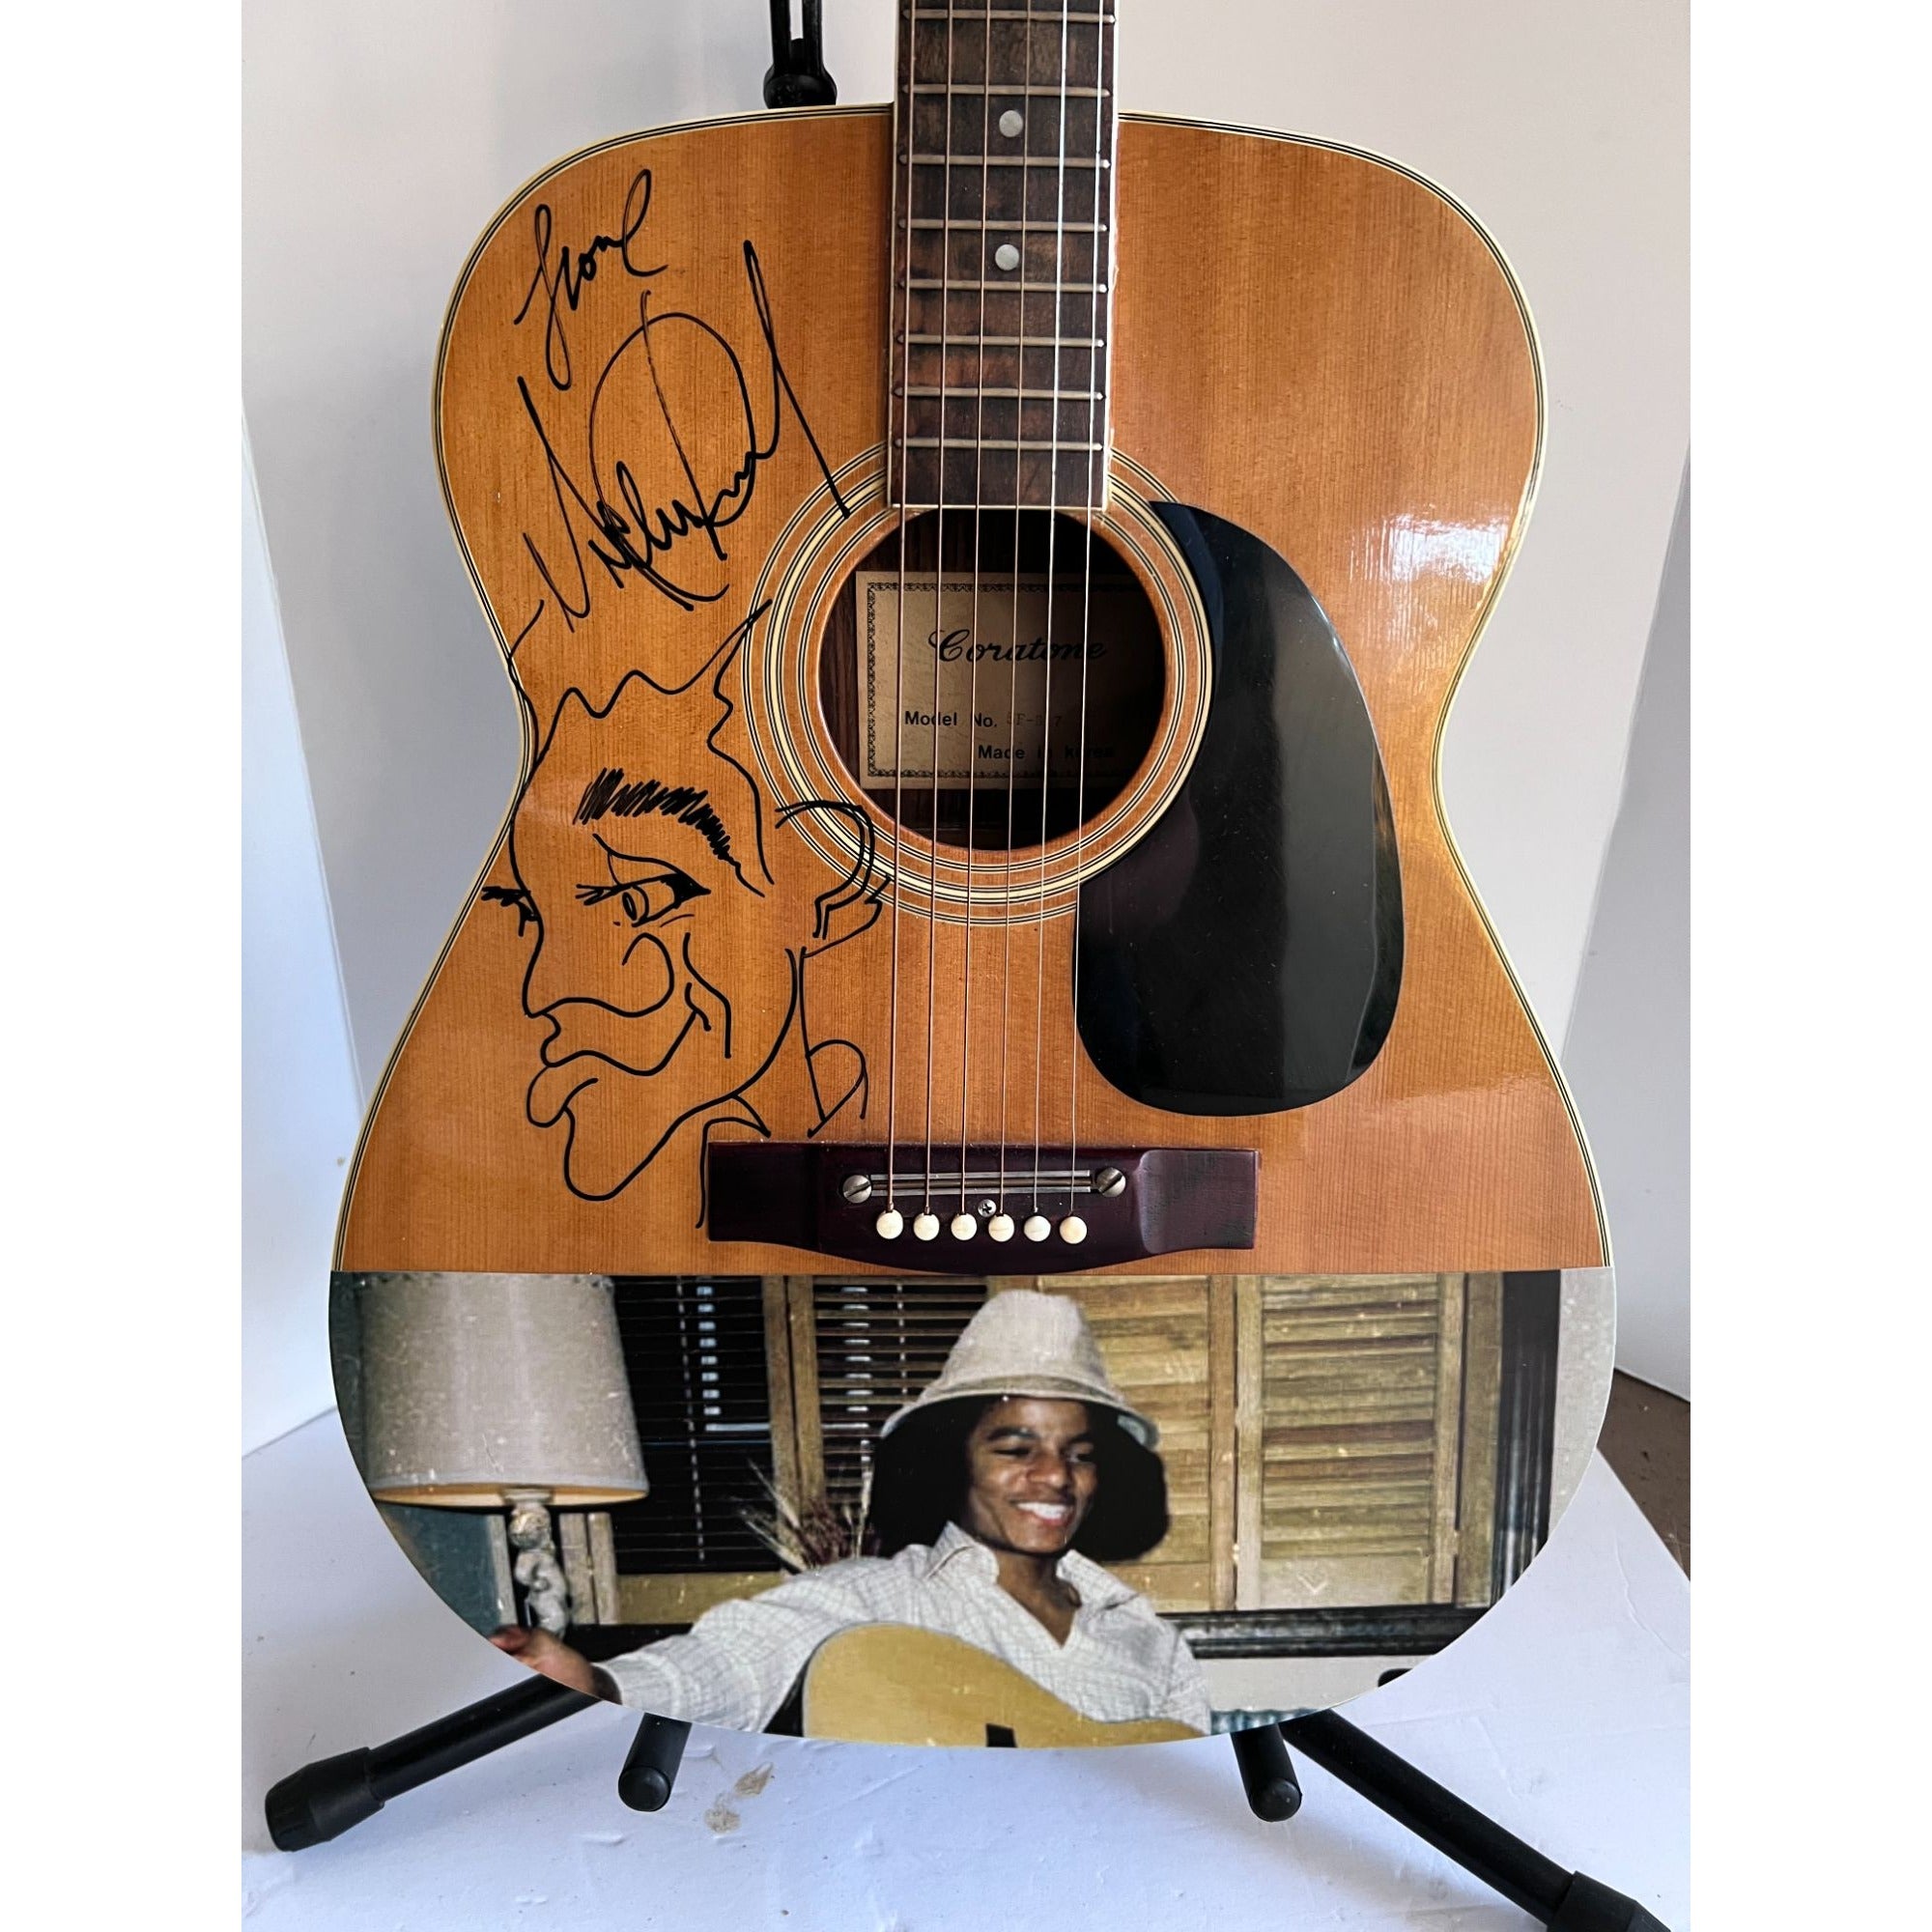 Michael Jackson with hand sketch One of A kind 39' inch full size acoustic guitar signed